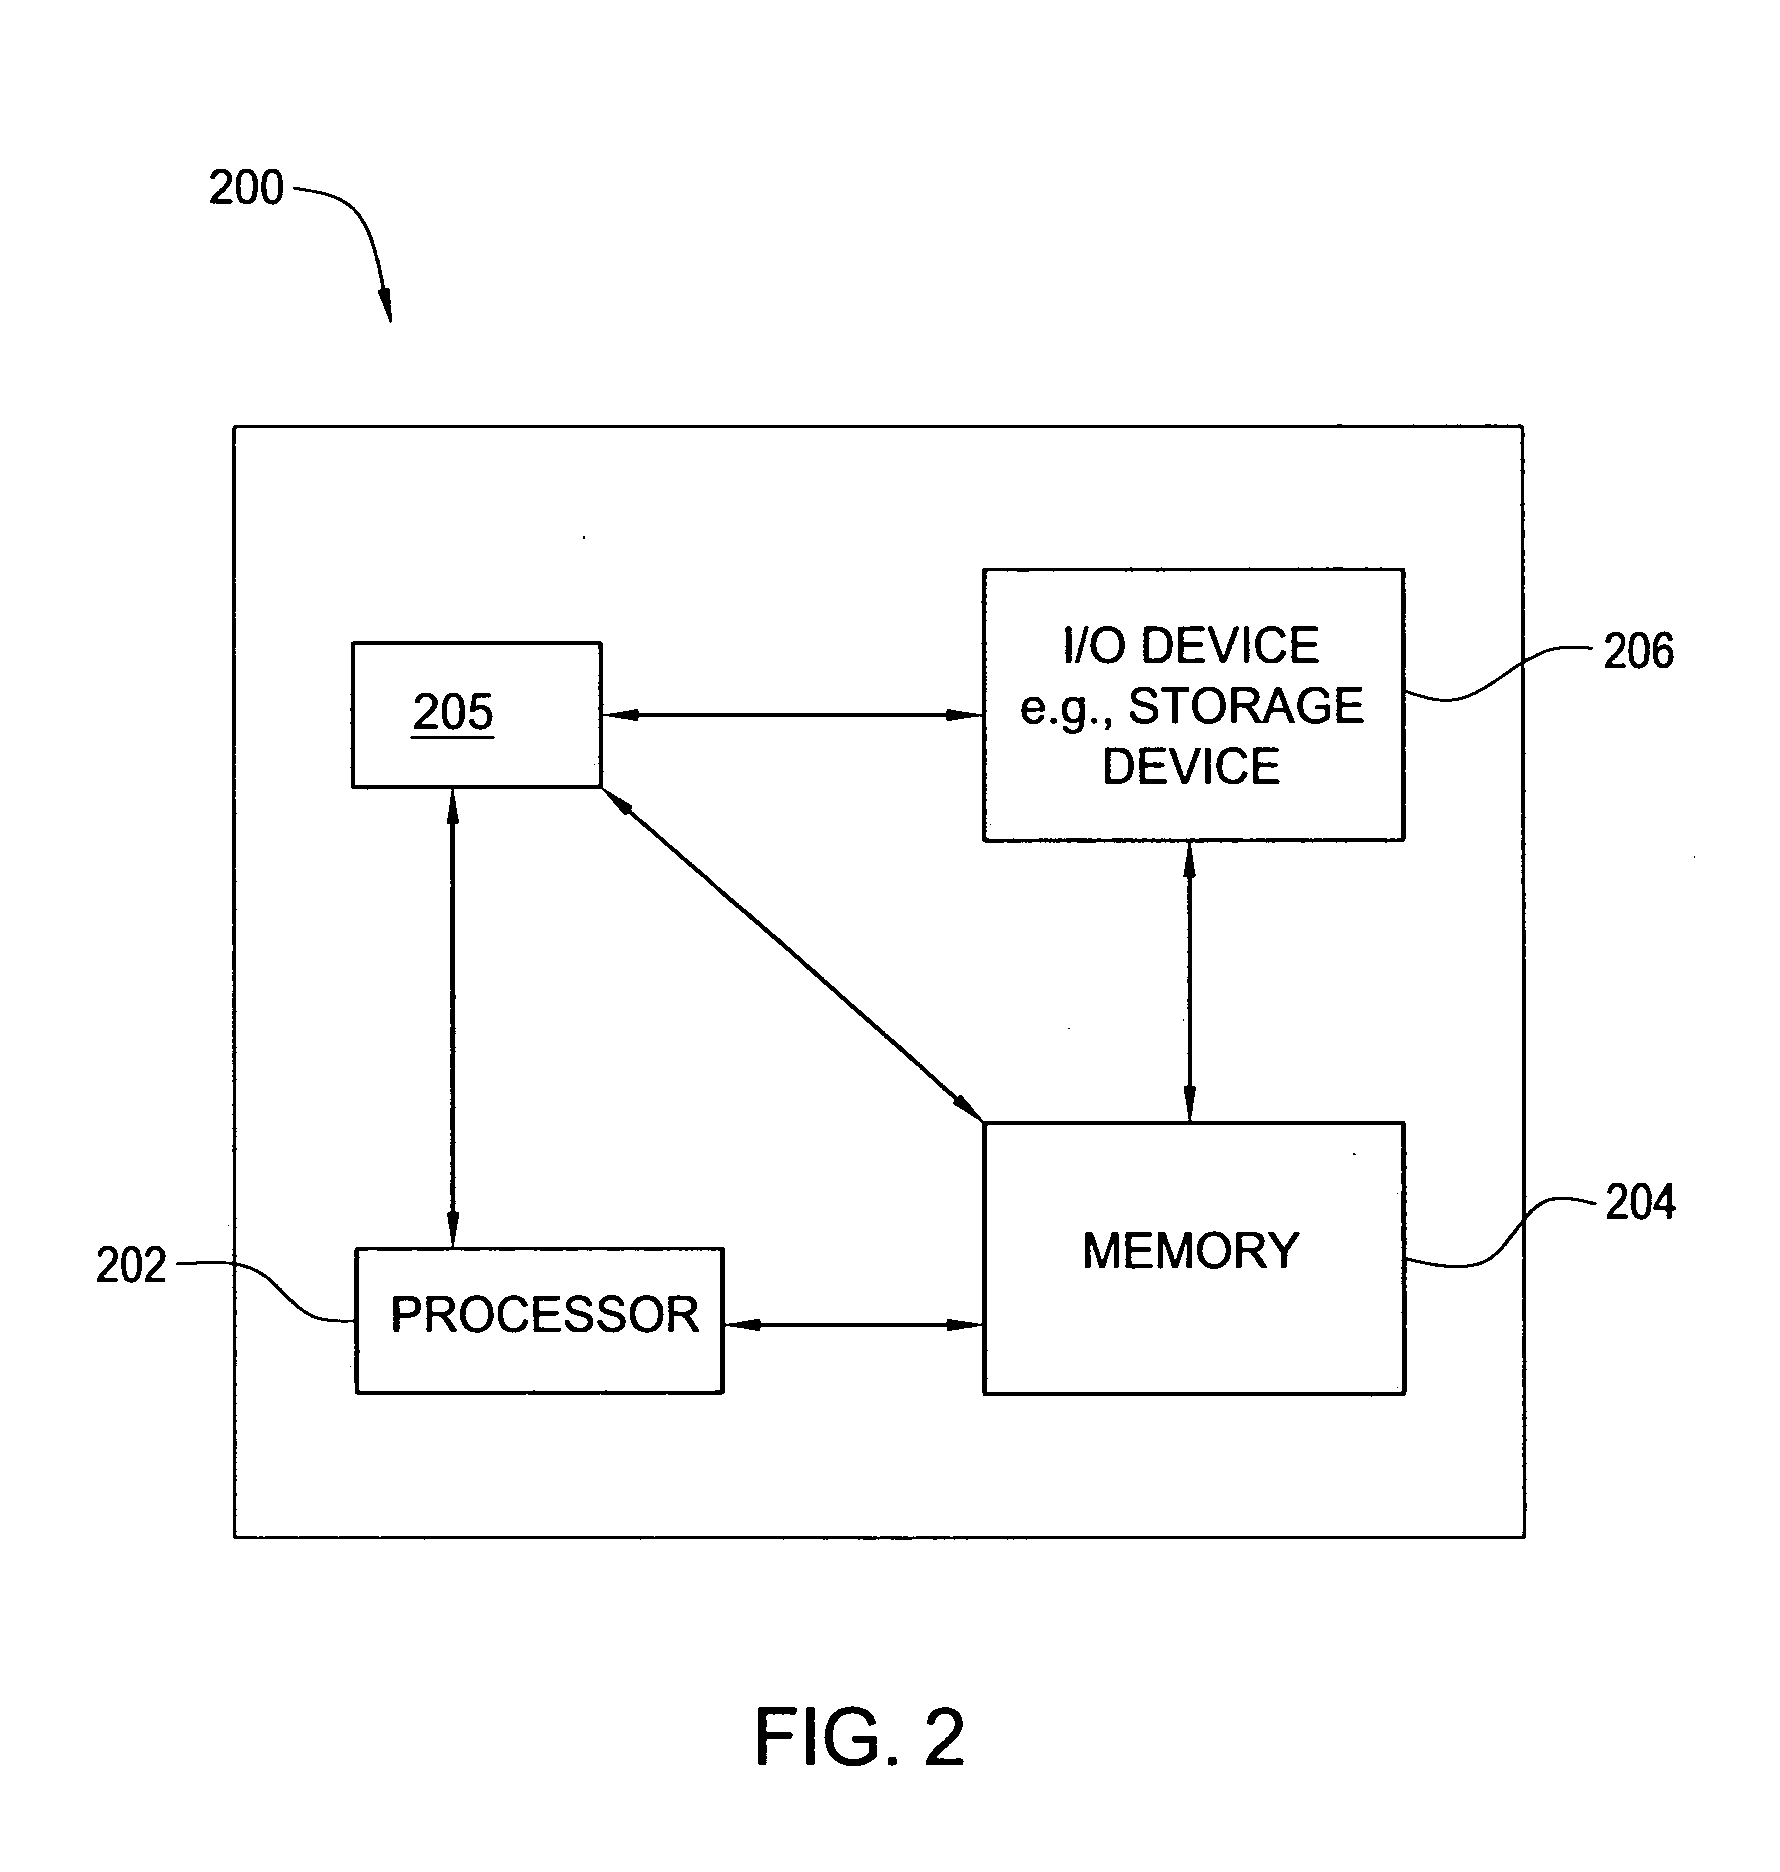 Method and apparatus for organizing information in a world wide web page format